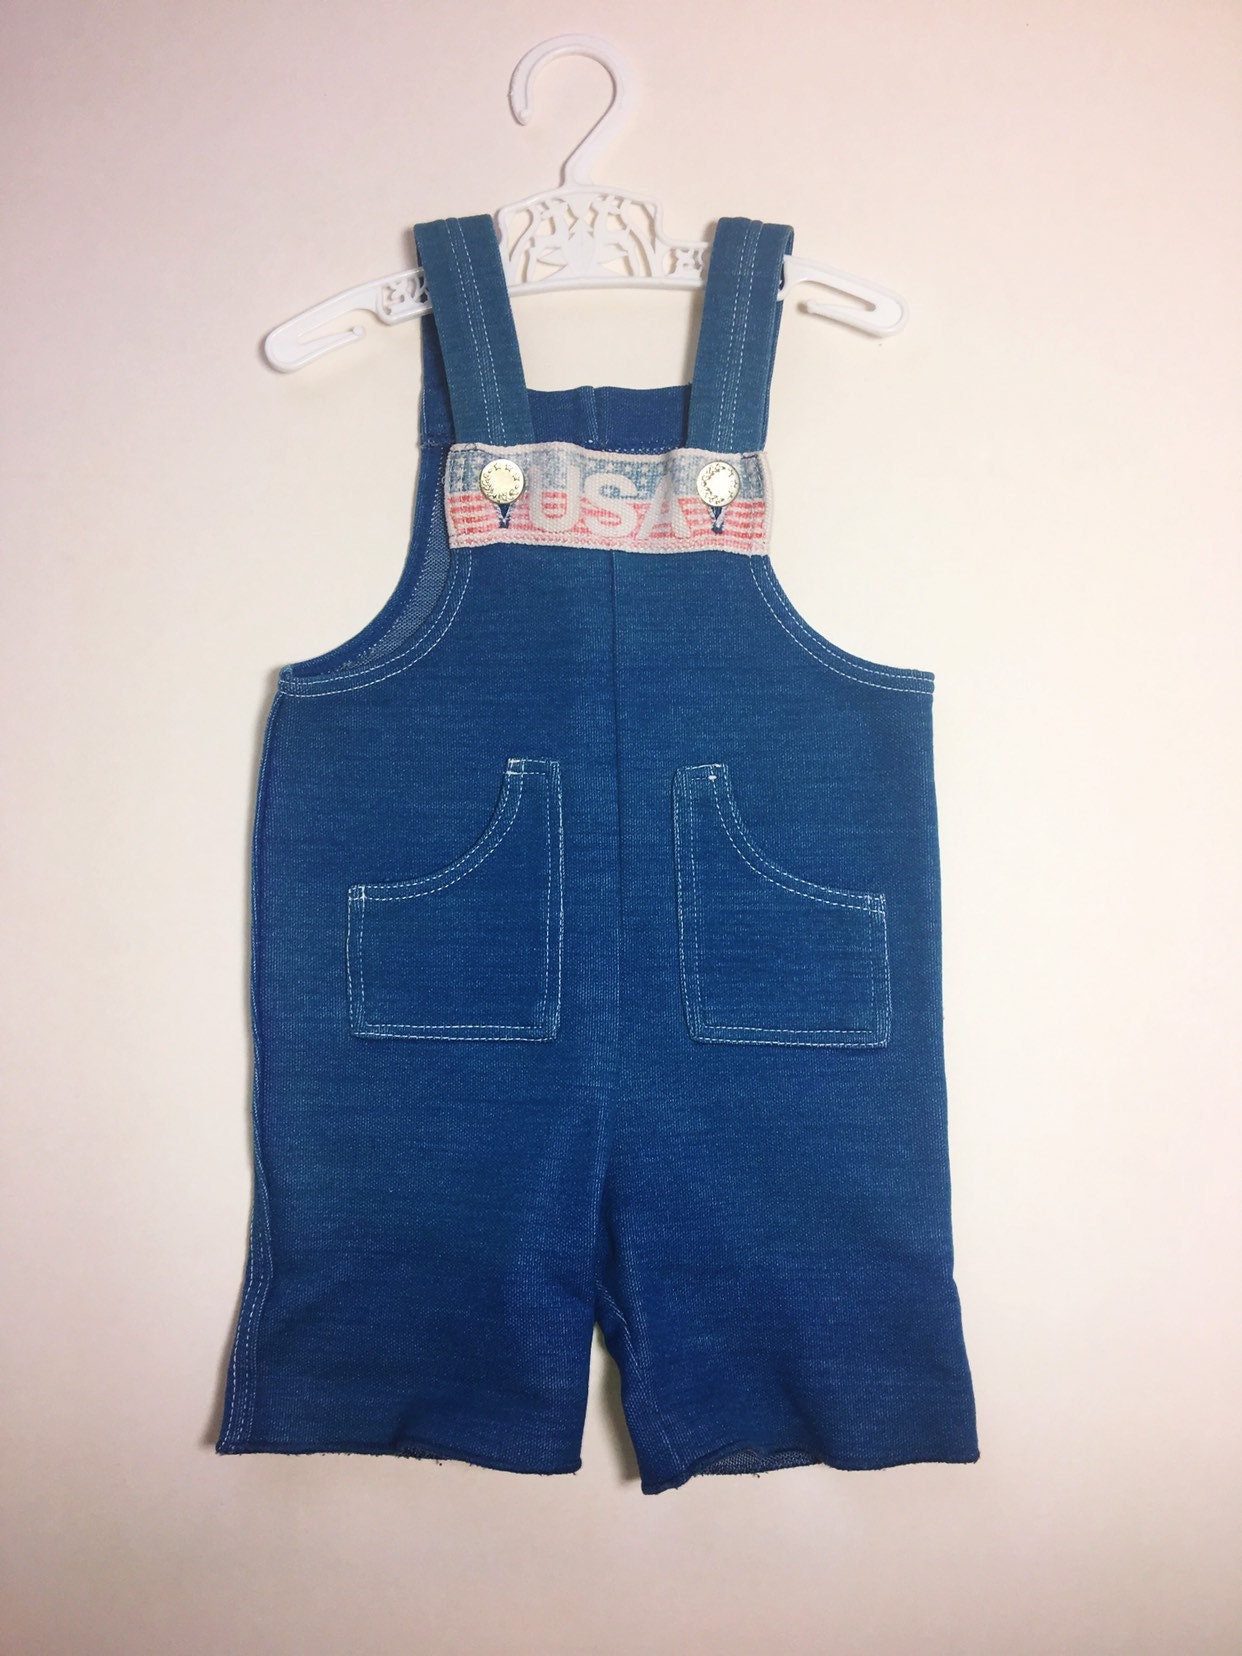 Vintage 1970's USA blue baby boy girl dungarees age 6-9 | Etsy